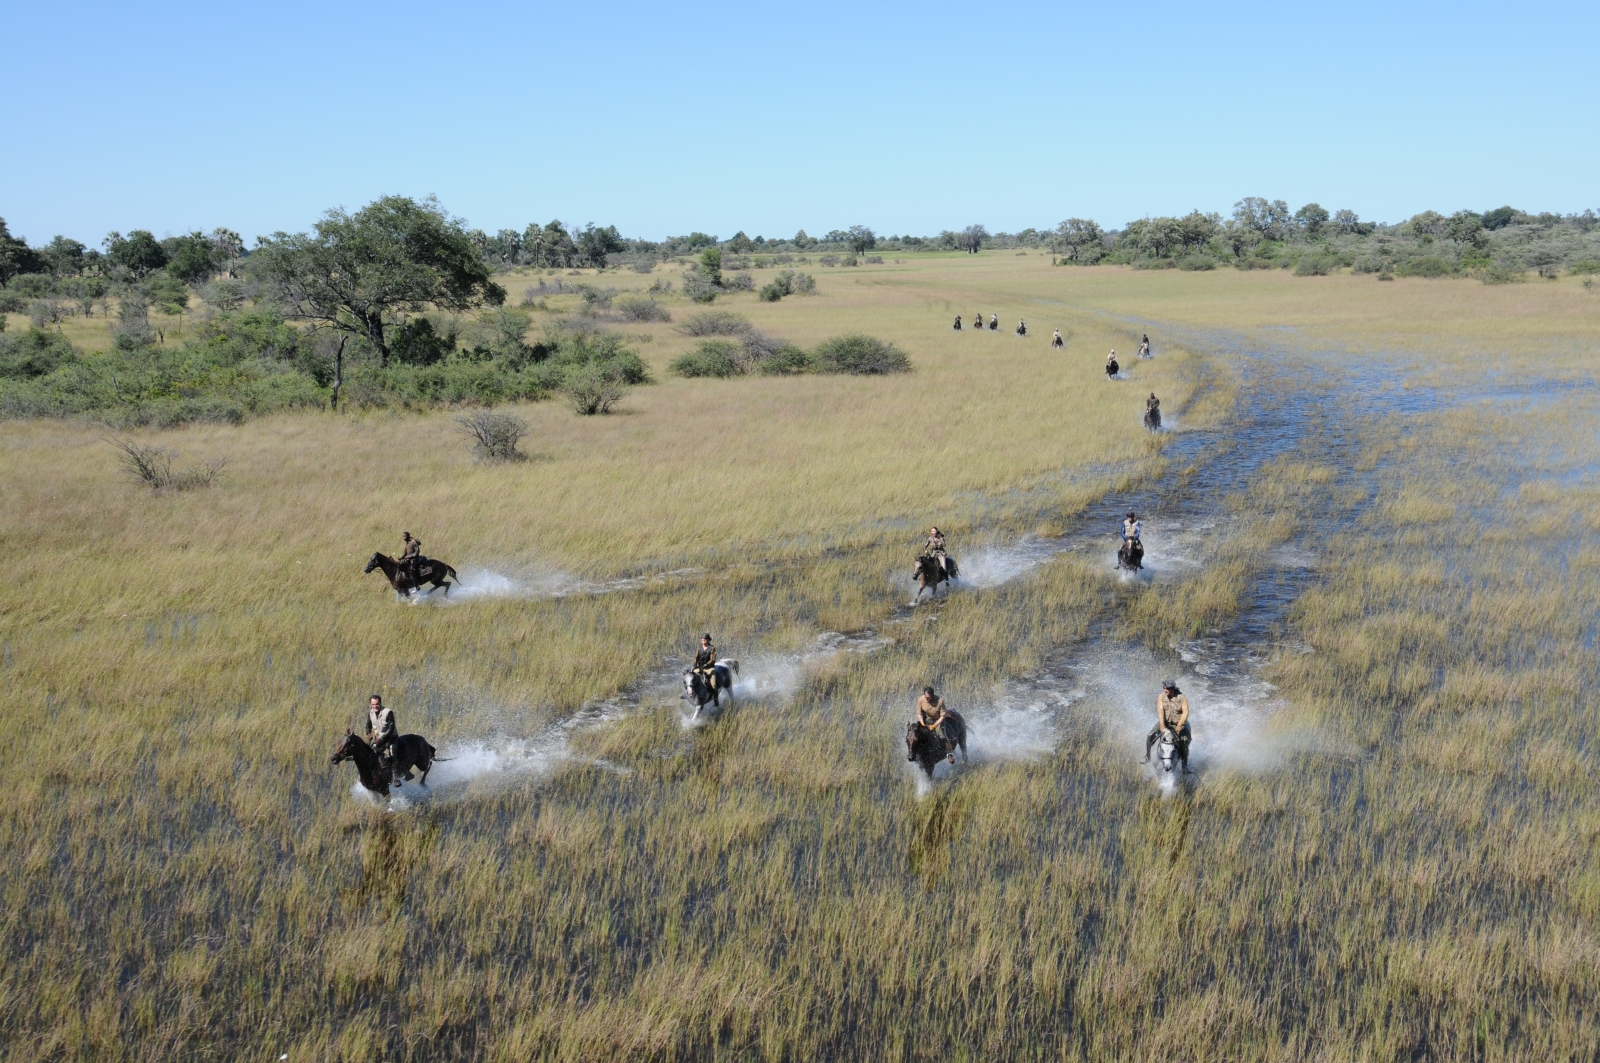 Aerial shot of group of people riding through the waters of the Okavango